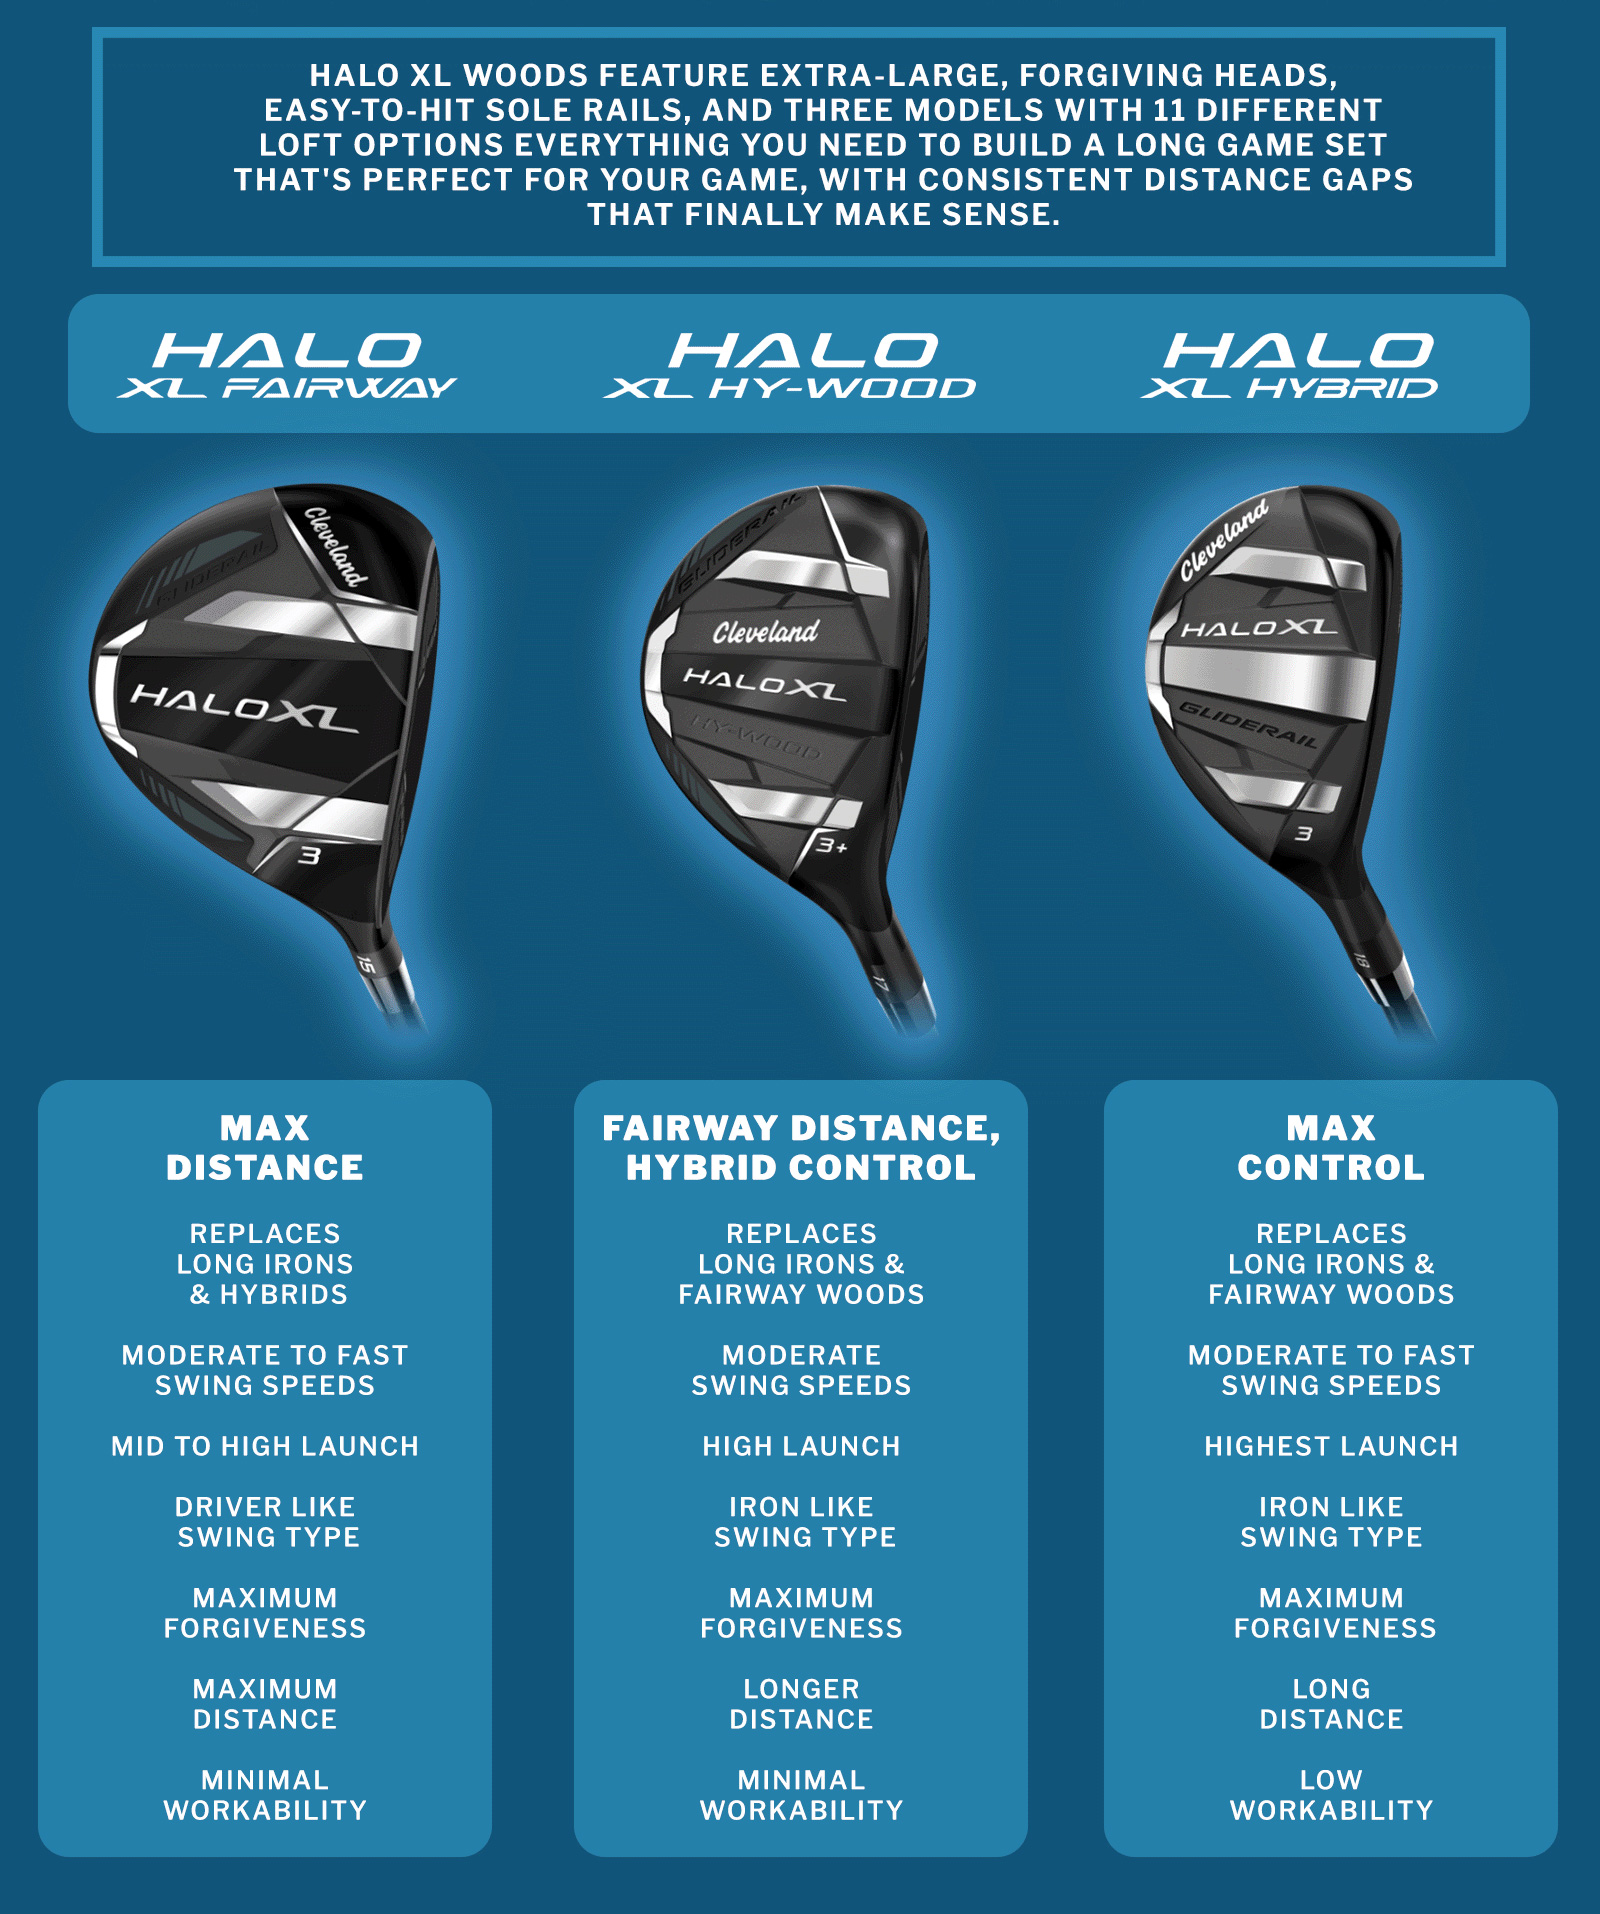 Halo XL Woods feature extra-large, forgiving heads, easy-to-hit-sole rails, and three models with 11 different loft options